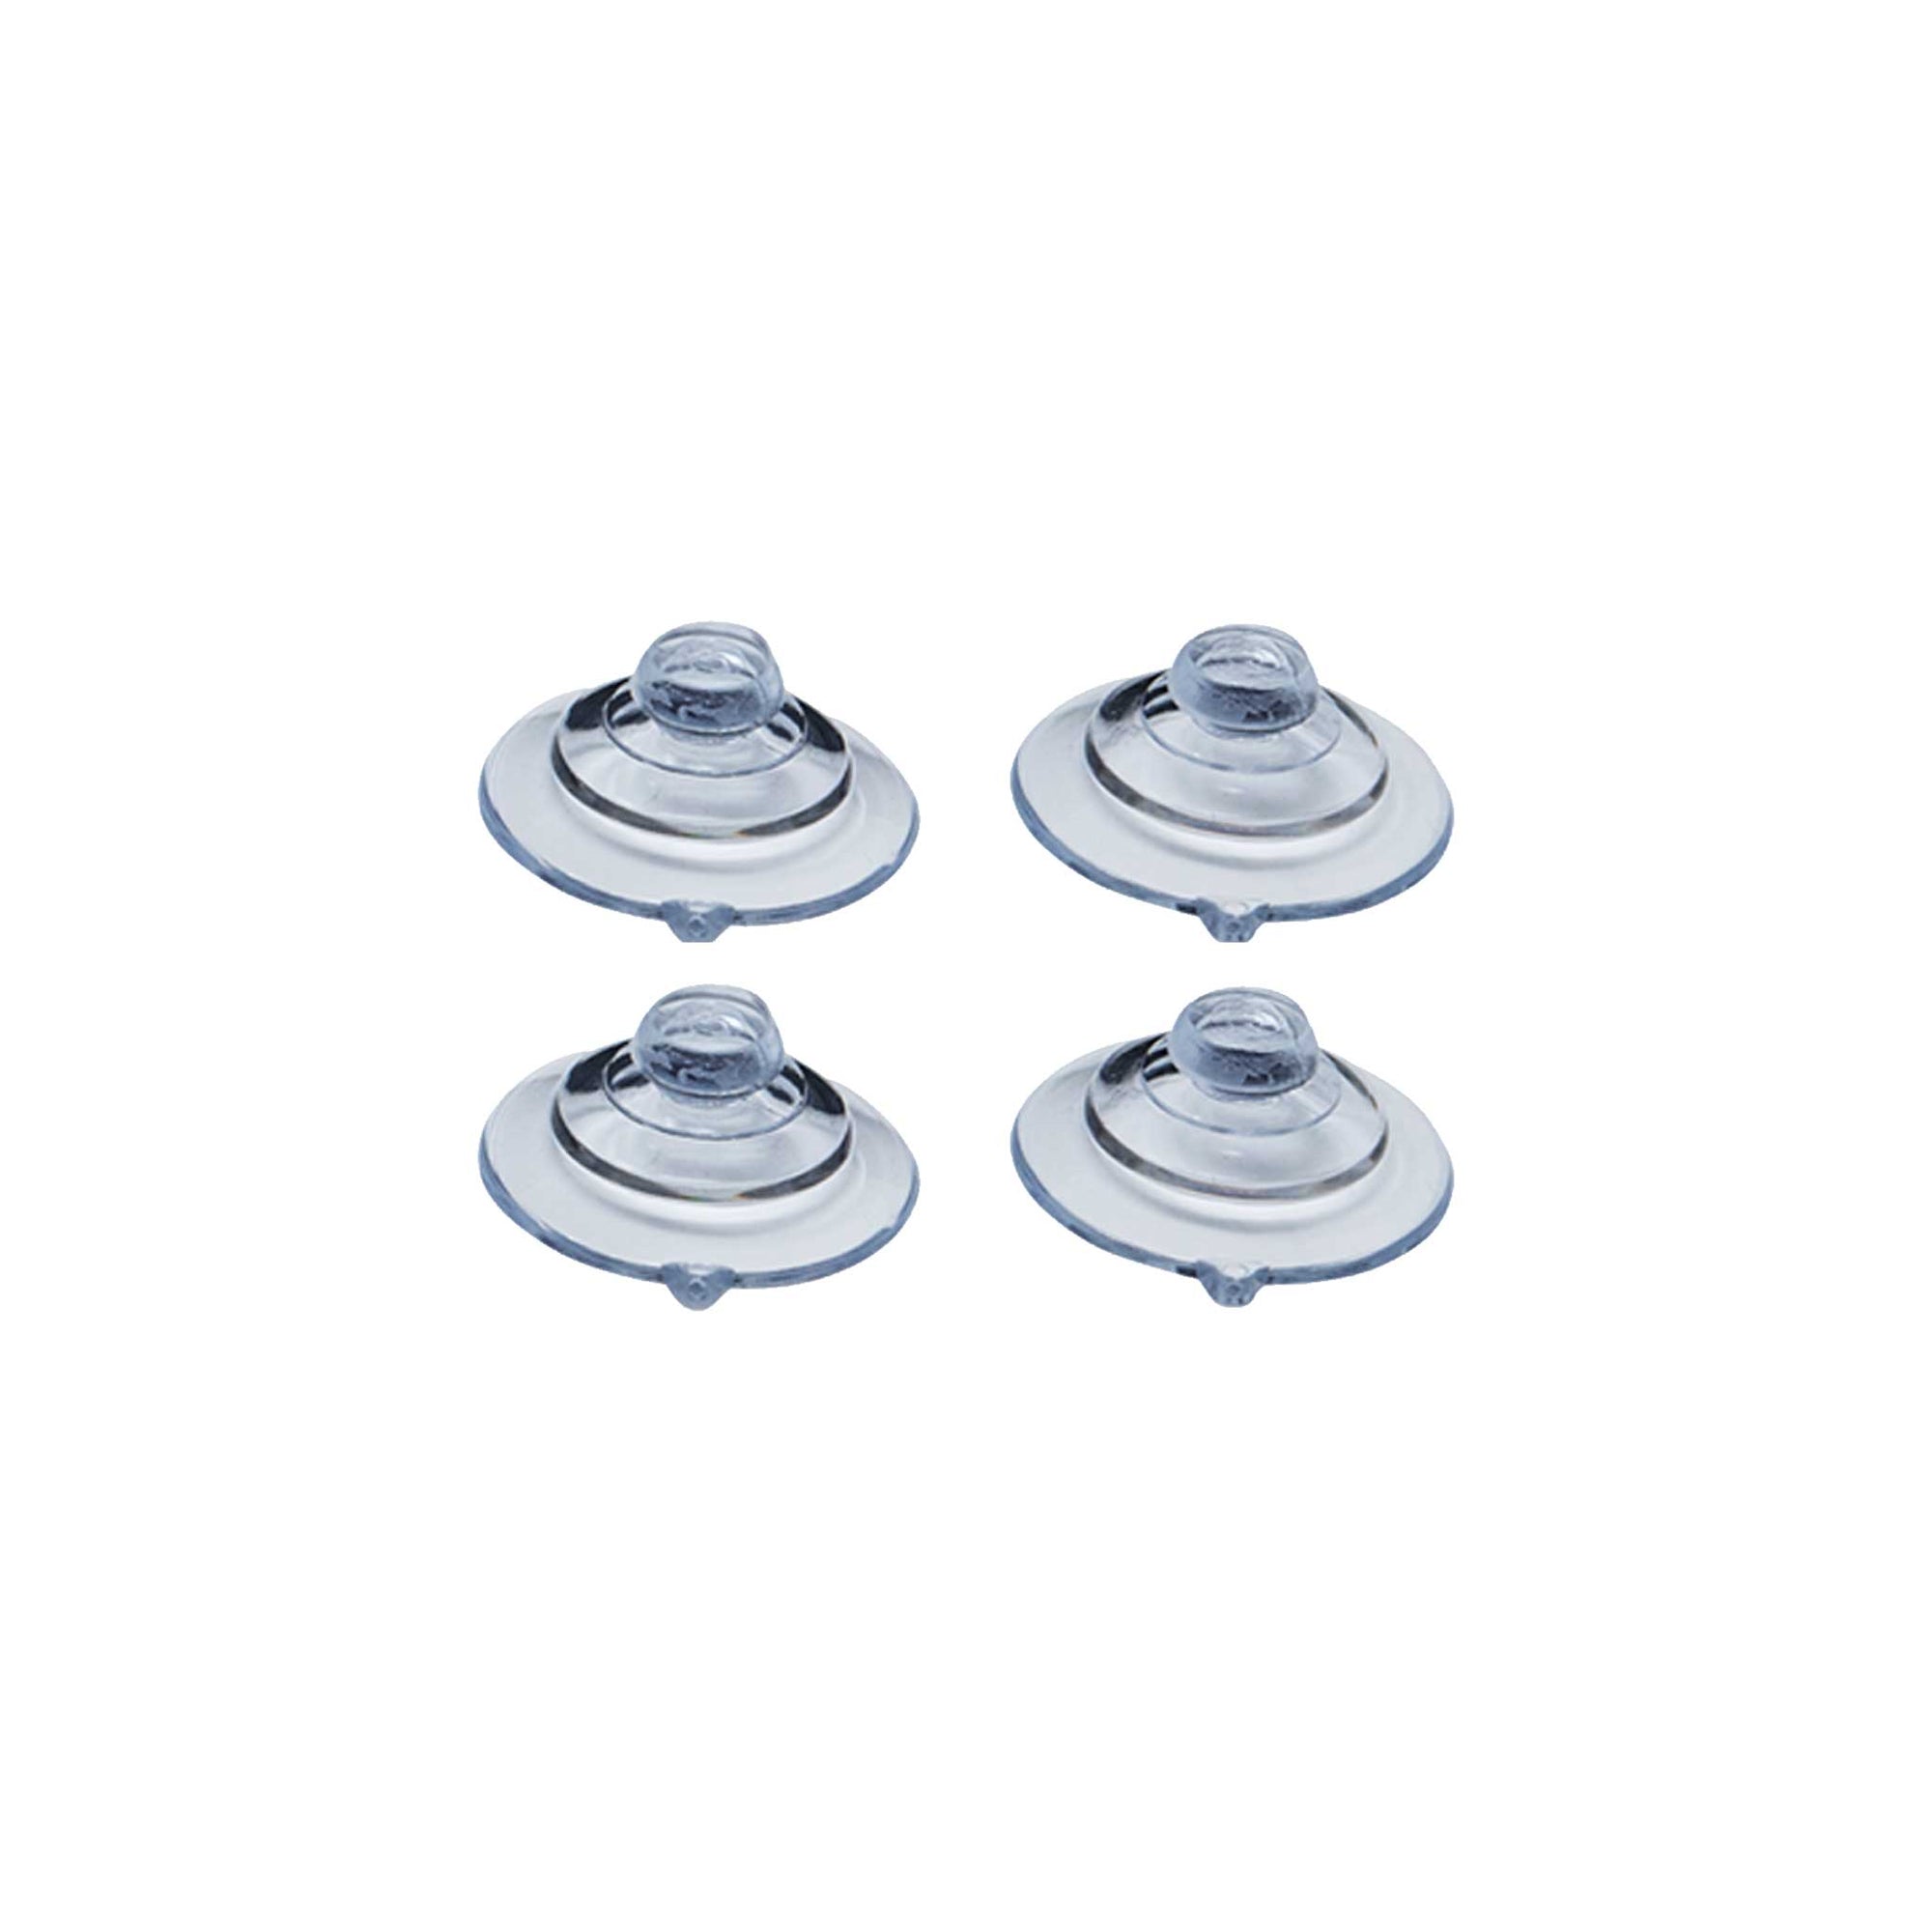 Radenso Suction Cups